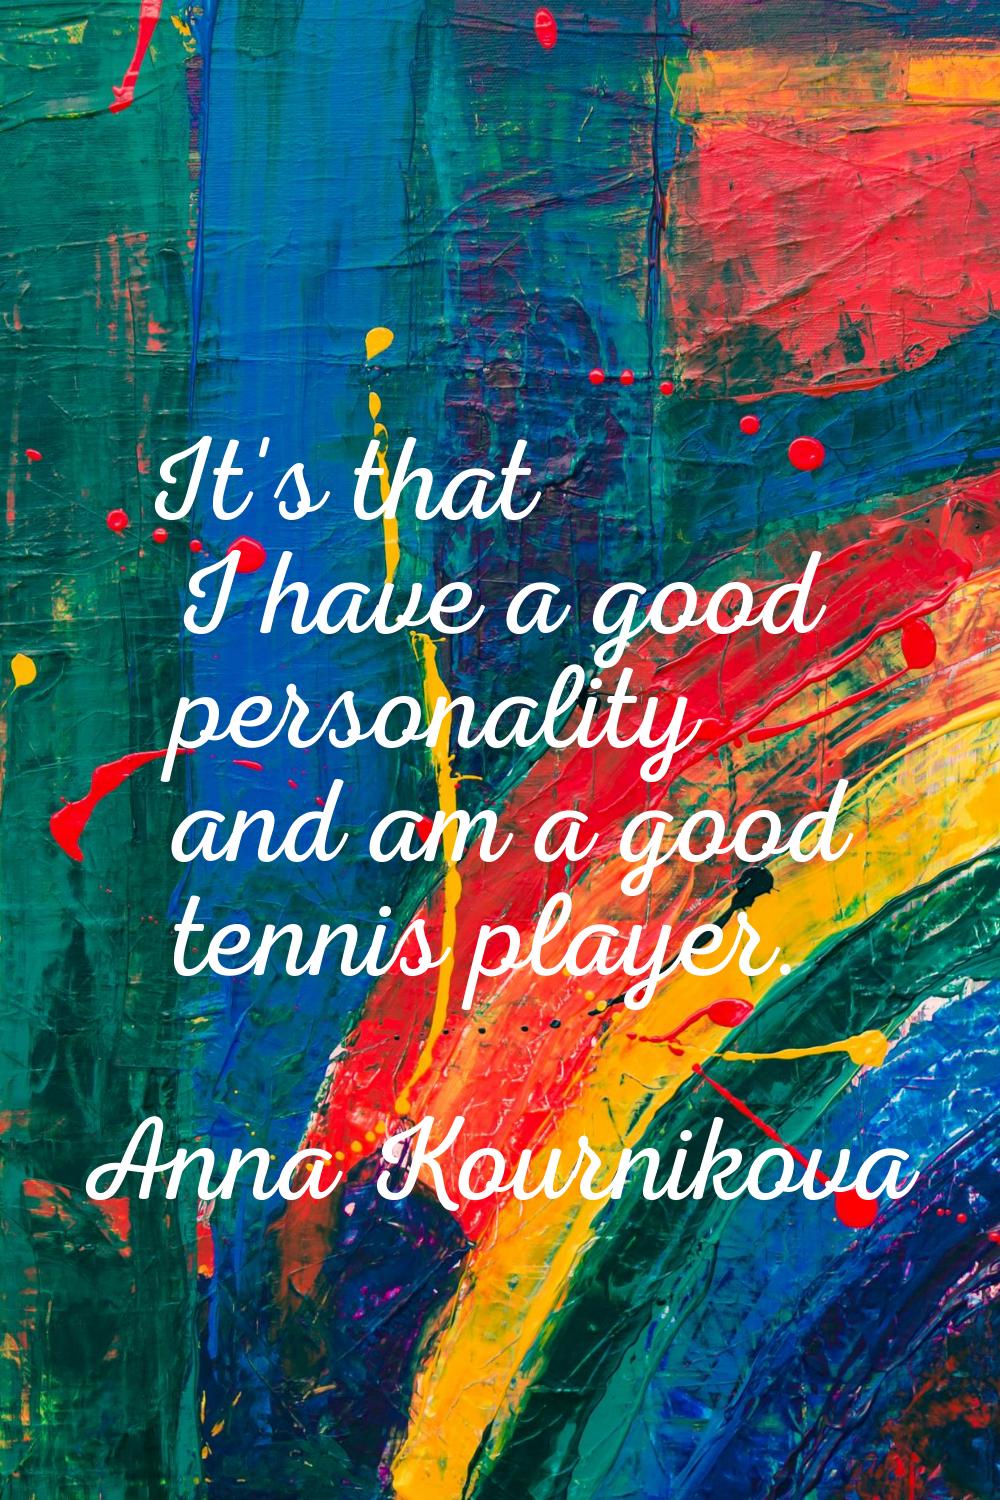 It's that I have a good personality and am a good tennis player.